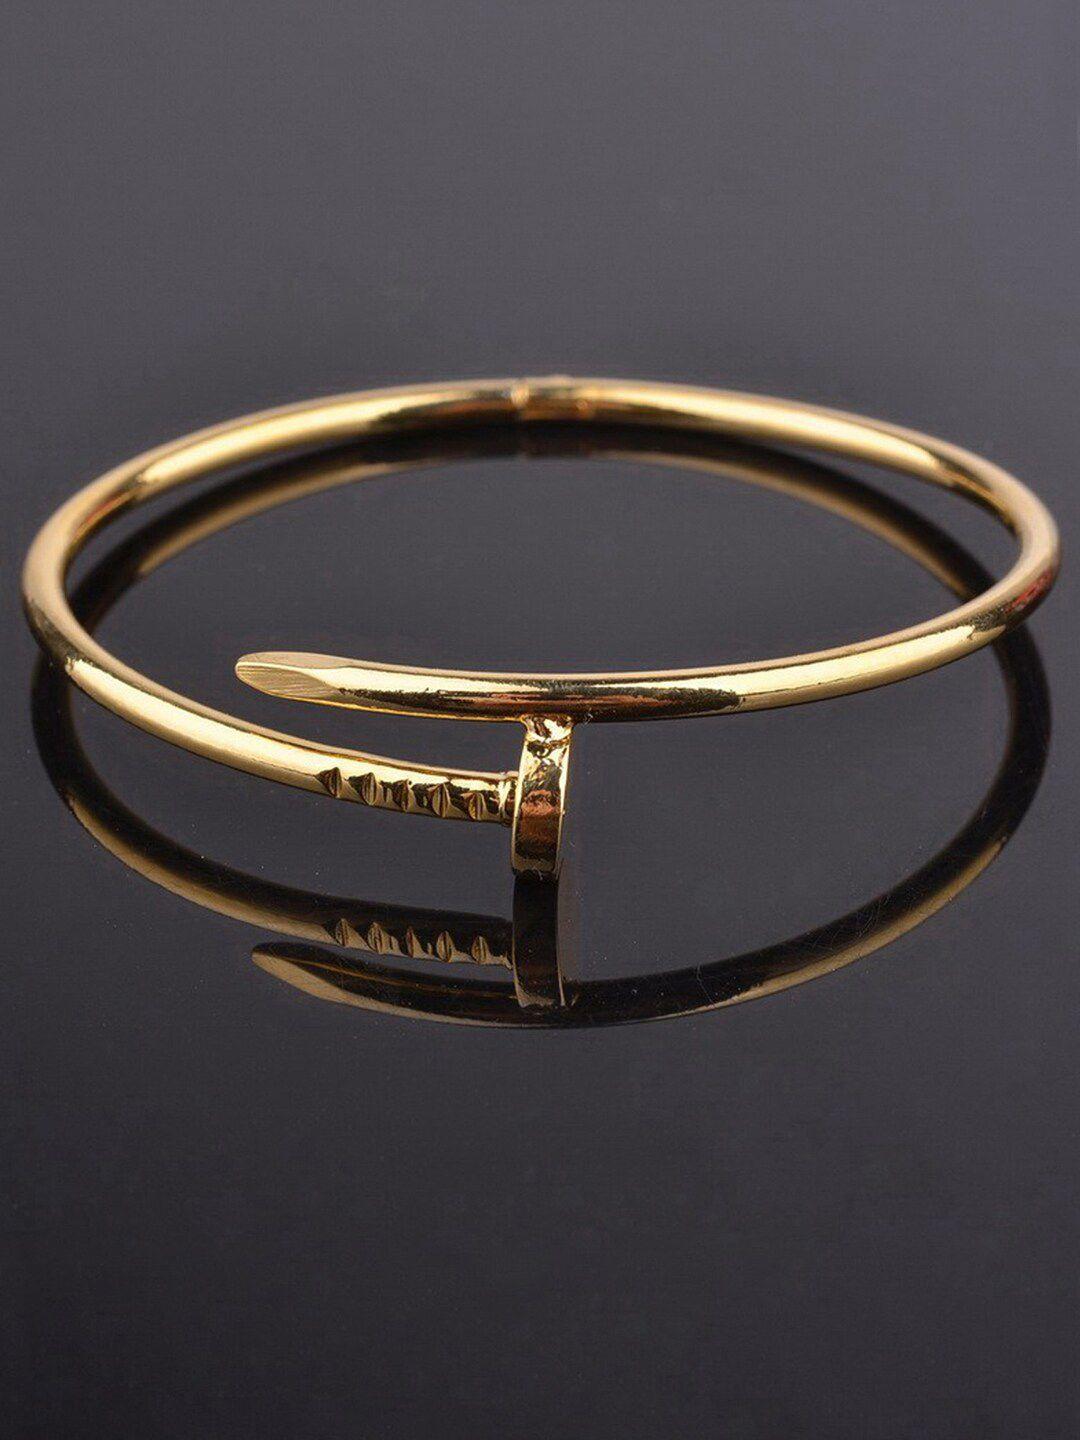 designs & you women gold-plated nail cuff bracelet